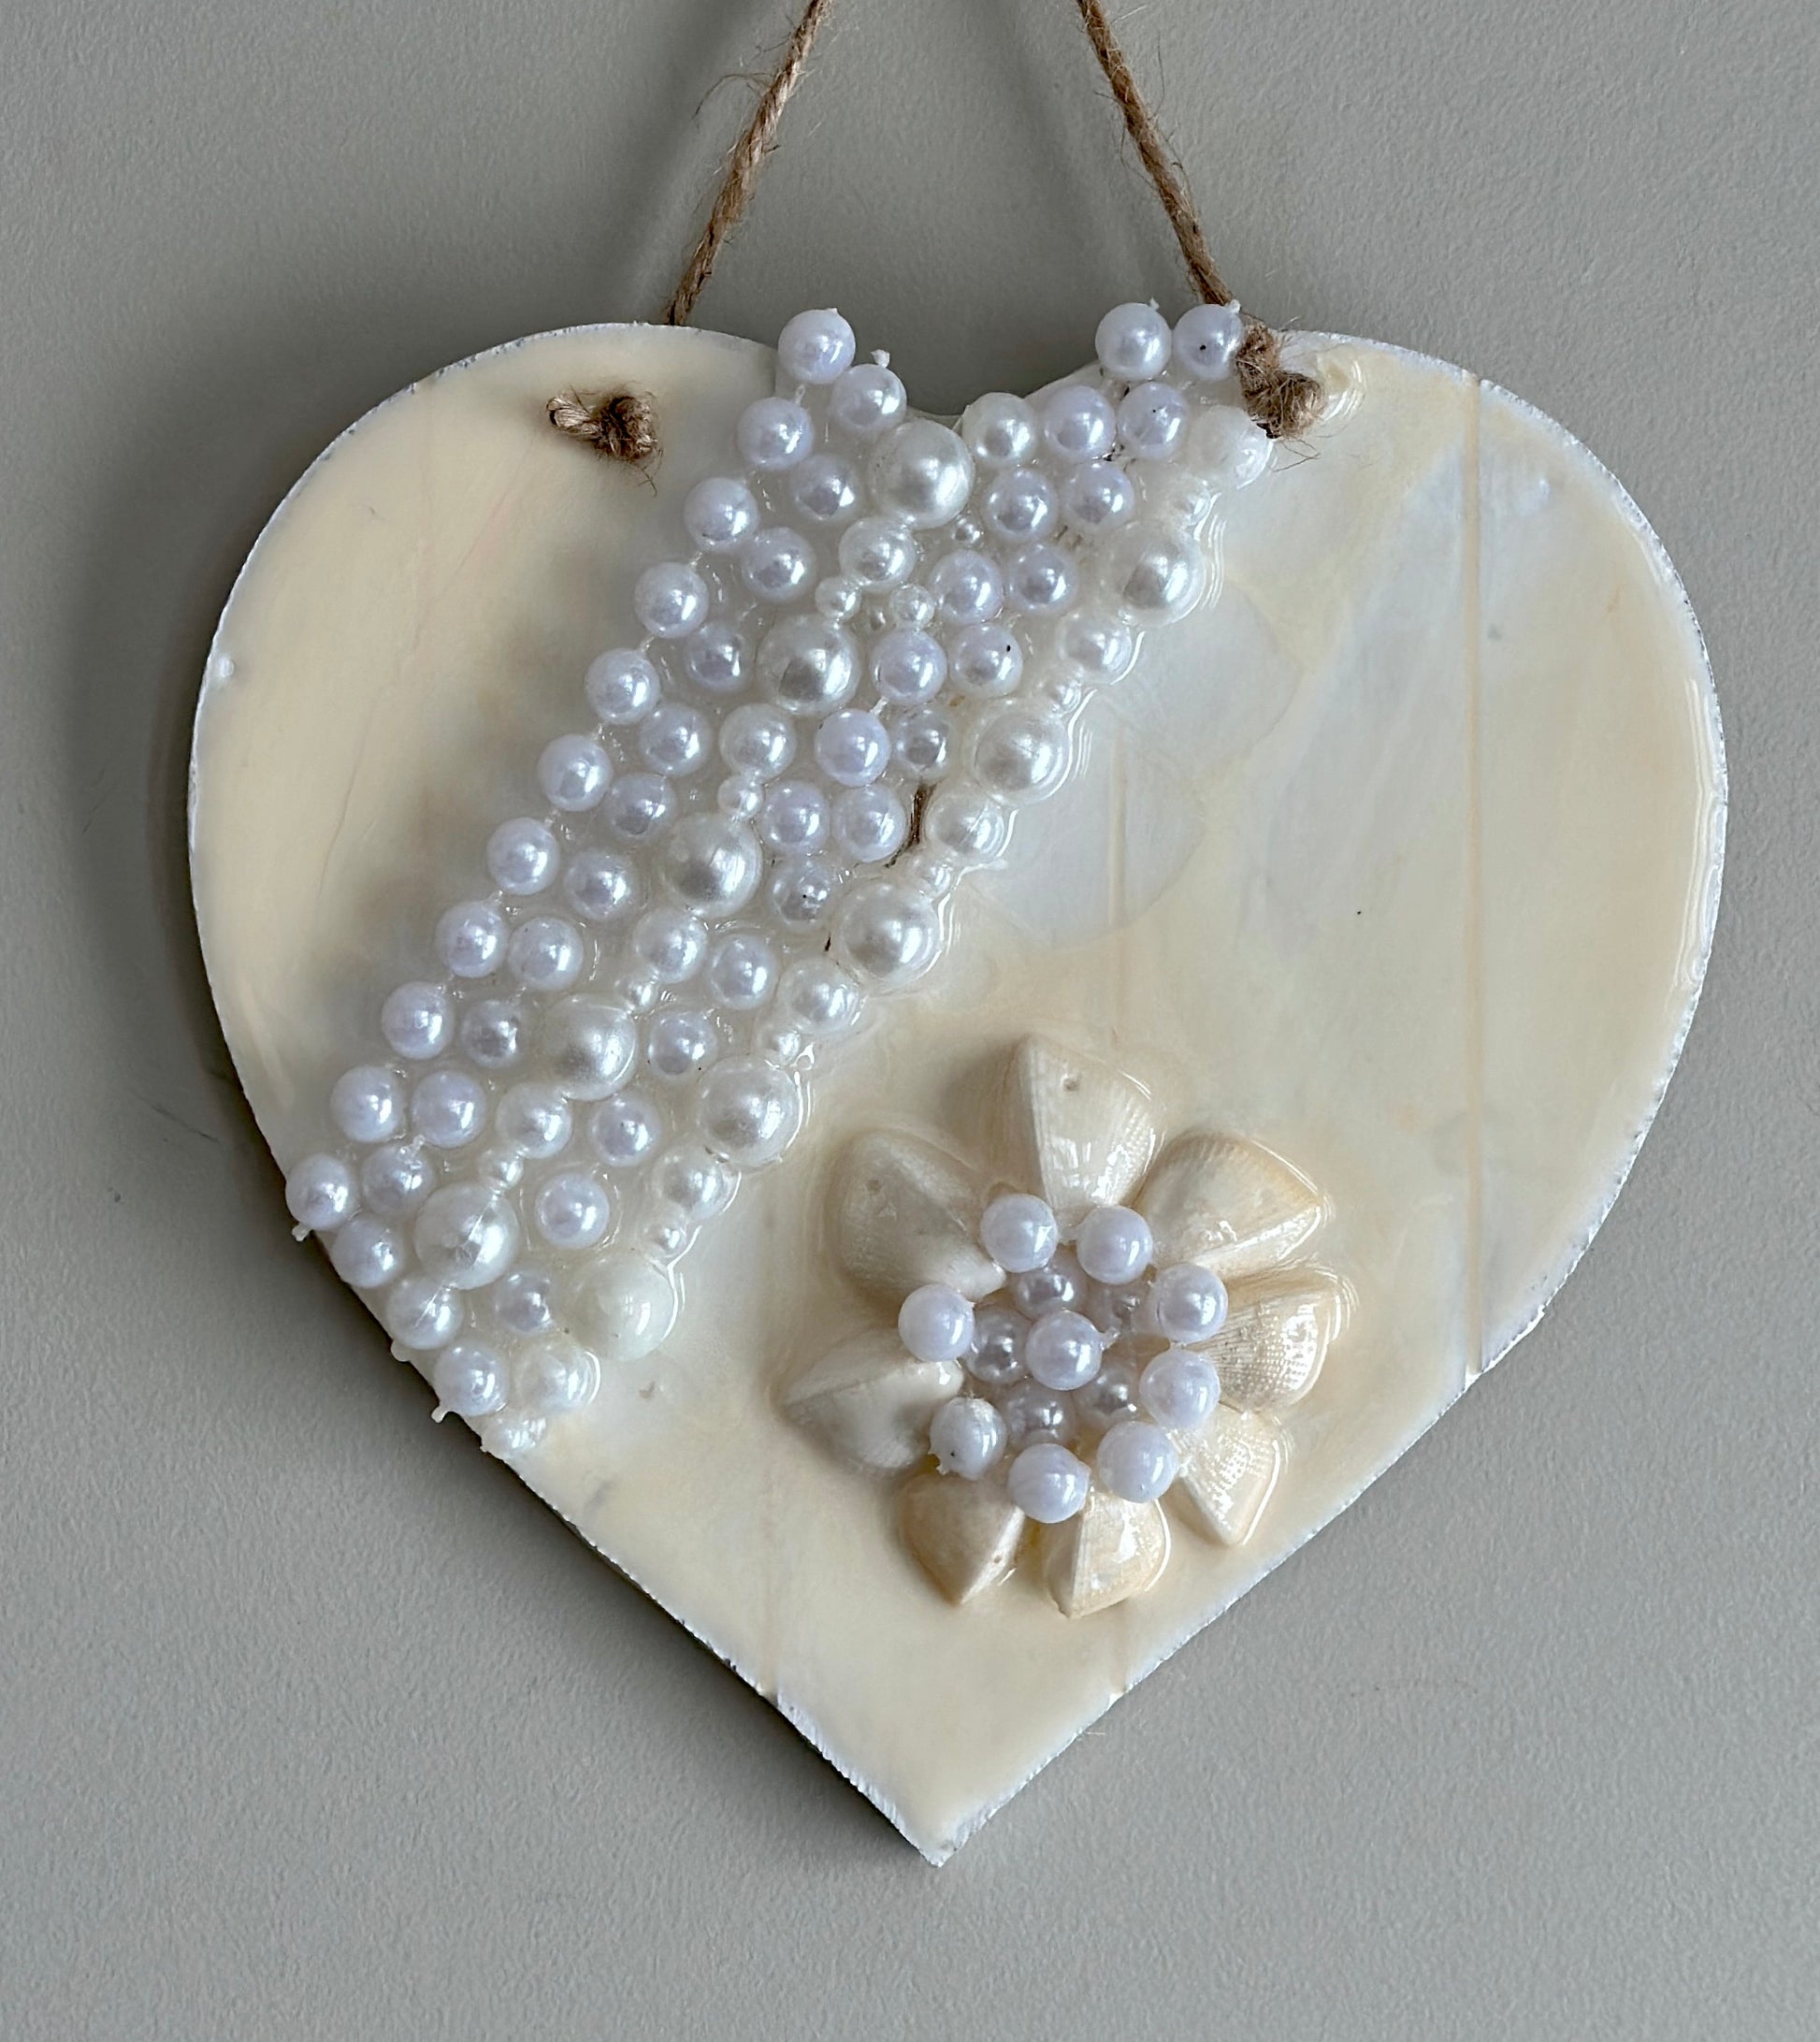 Pearls of the Ocean Heart - Handmade Resin Wall Art Inspired by Nature